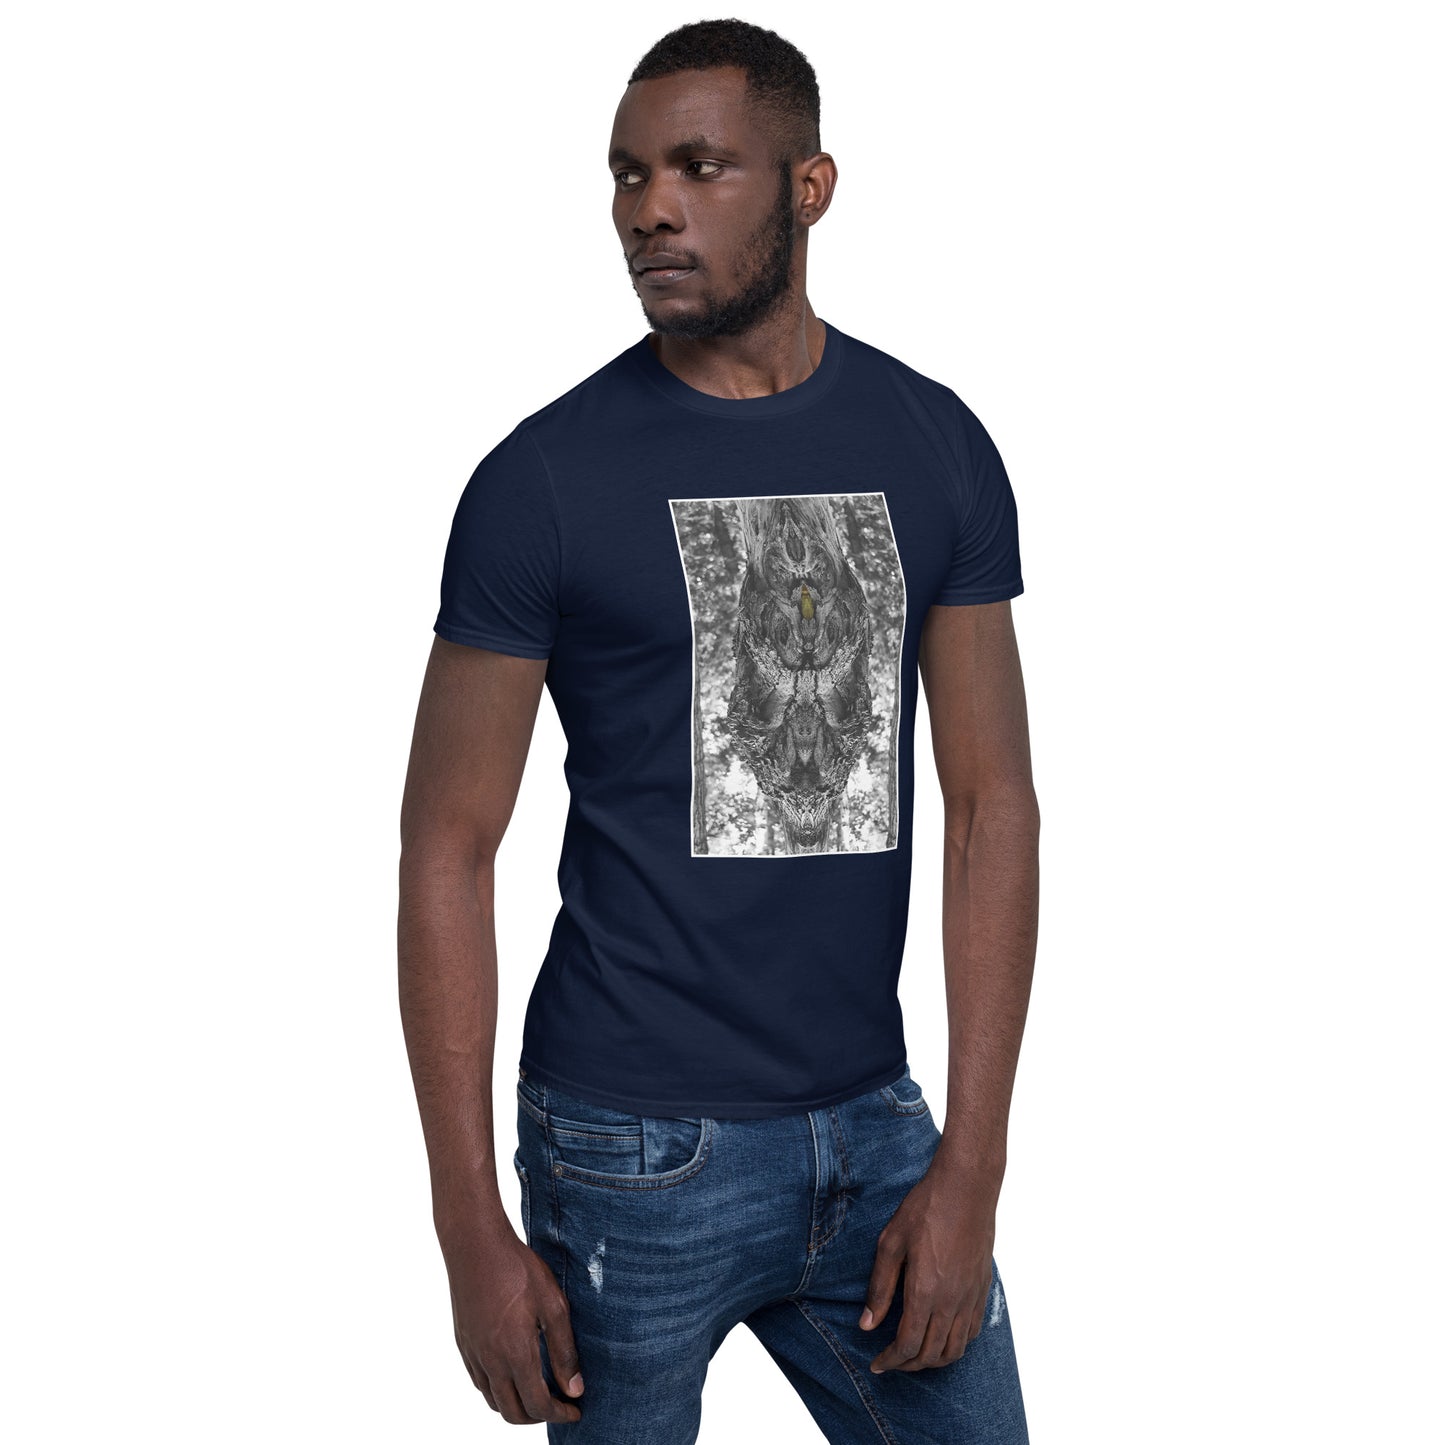 'I felt I was being watched' Short-Sleeve Unisex T-Shirt by Jon Butler